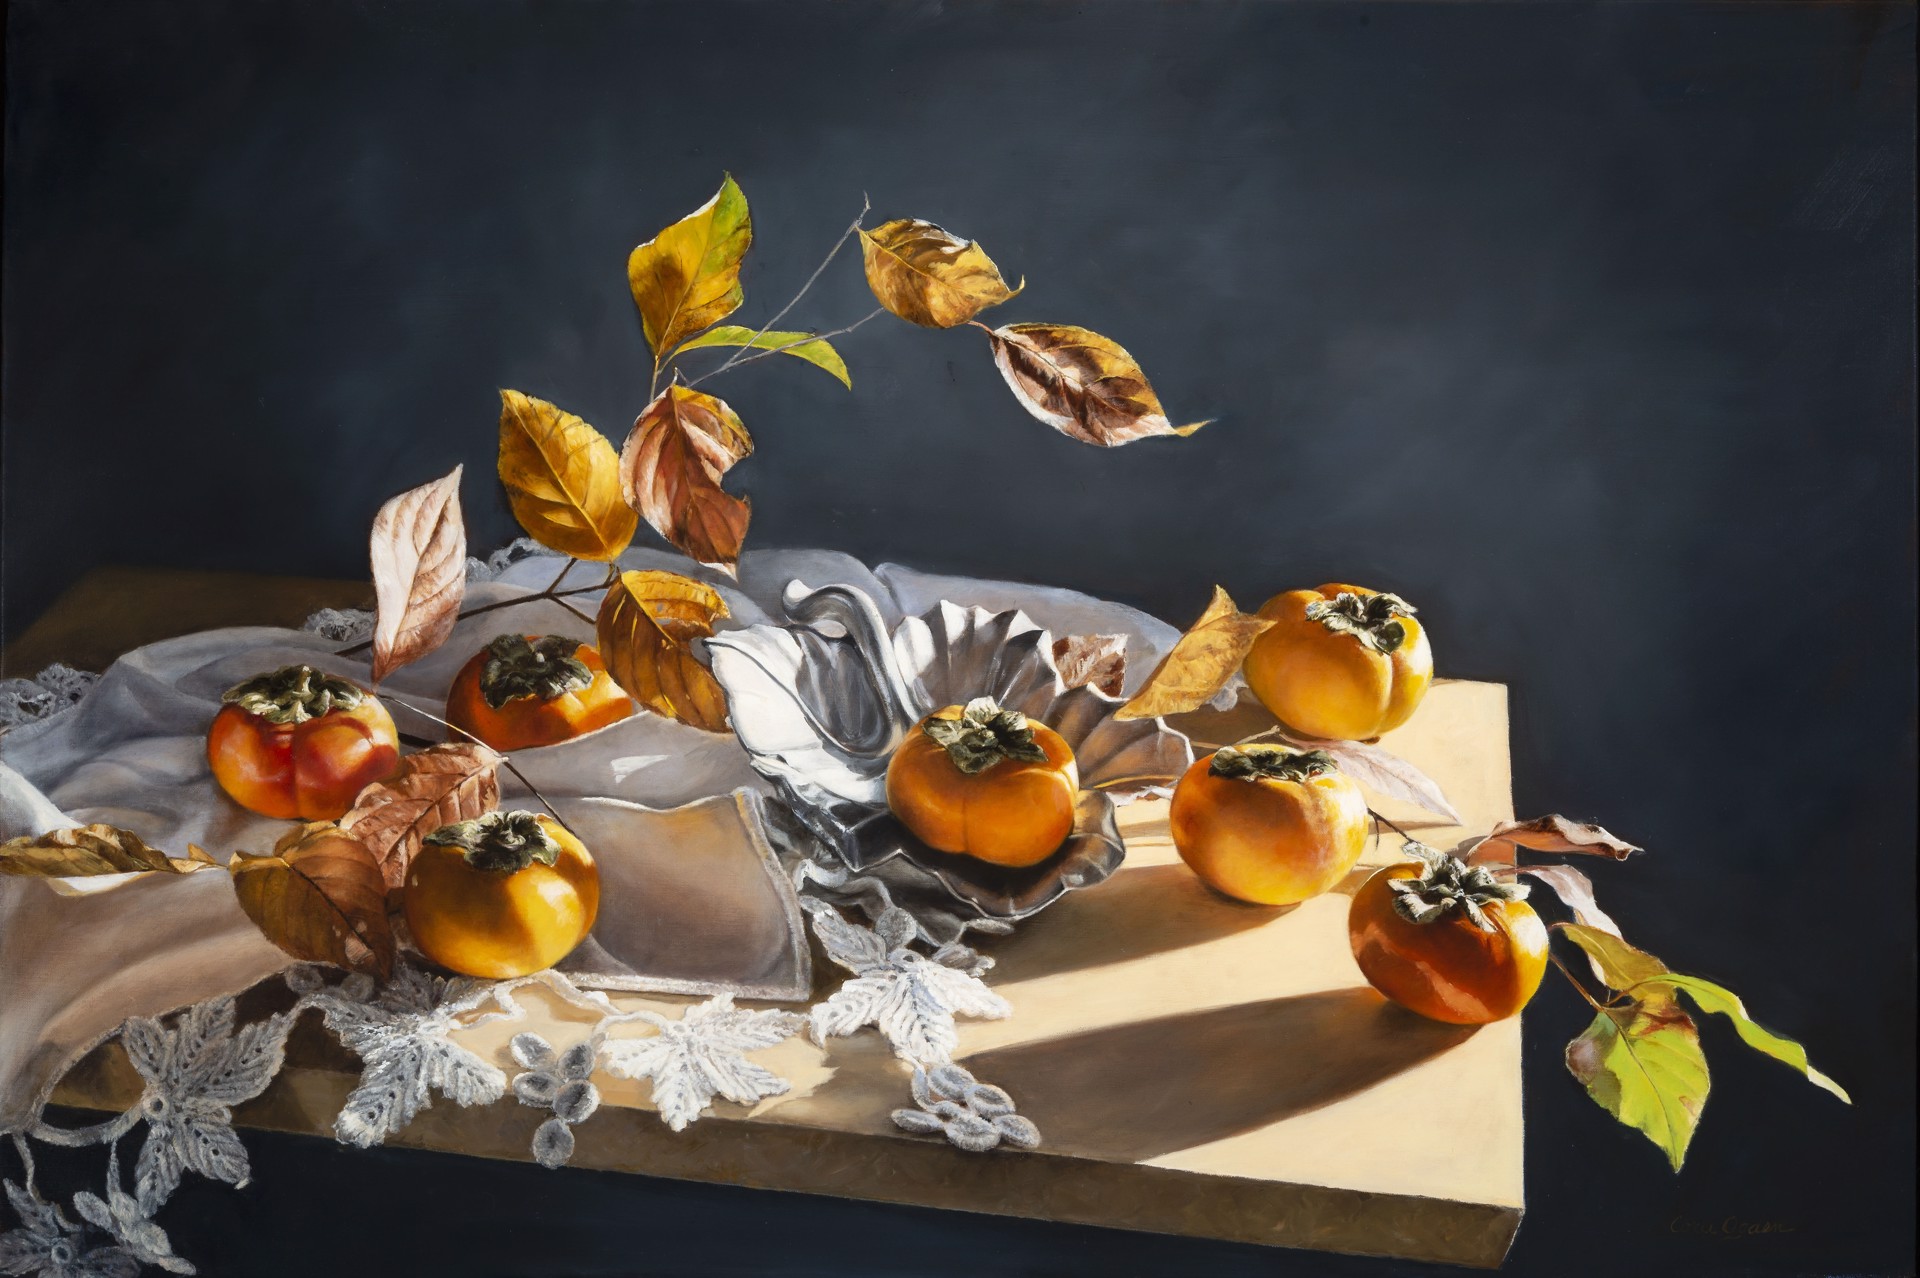 Persimmons in Afternoon Light by Cora Ogden